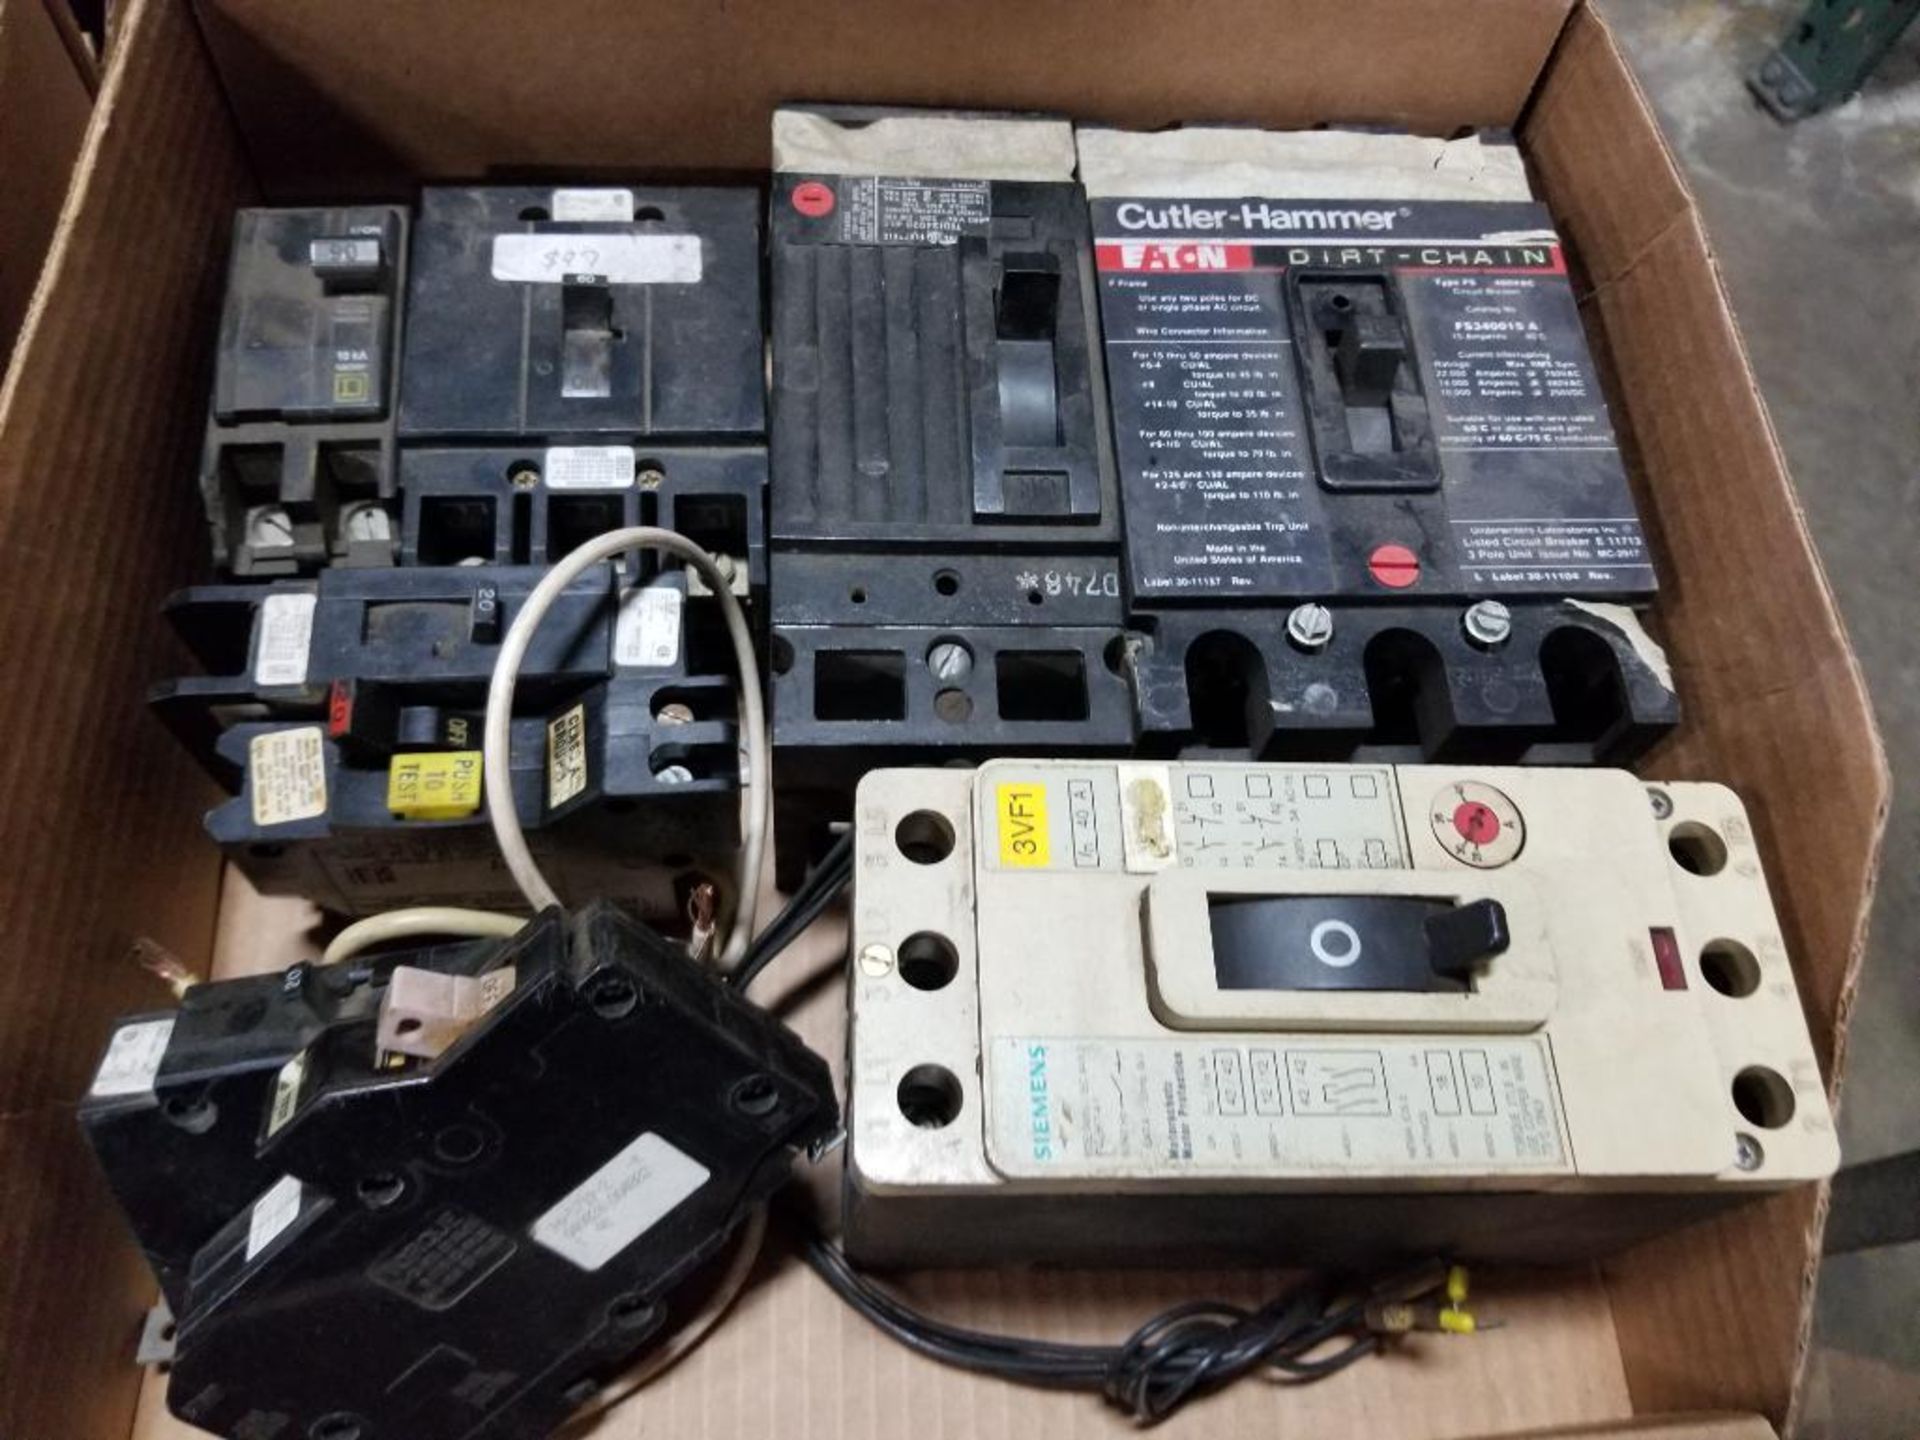 Assorted electrical breakers. Siemens, Cutler Hammer, Square-D.